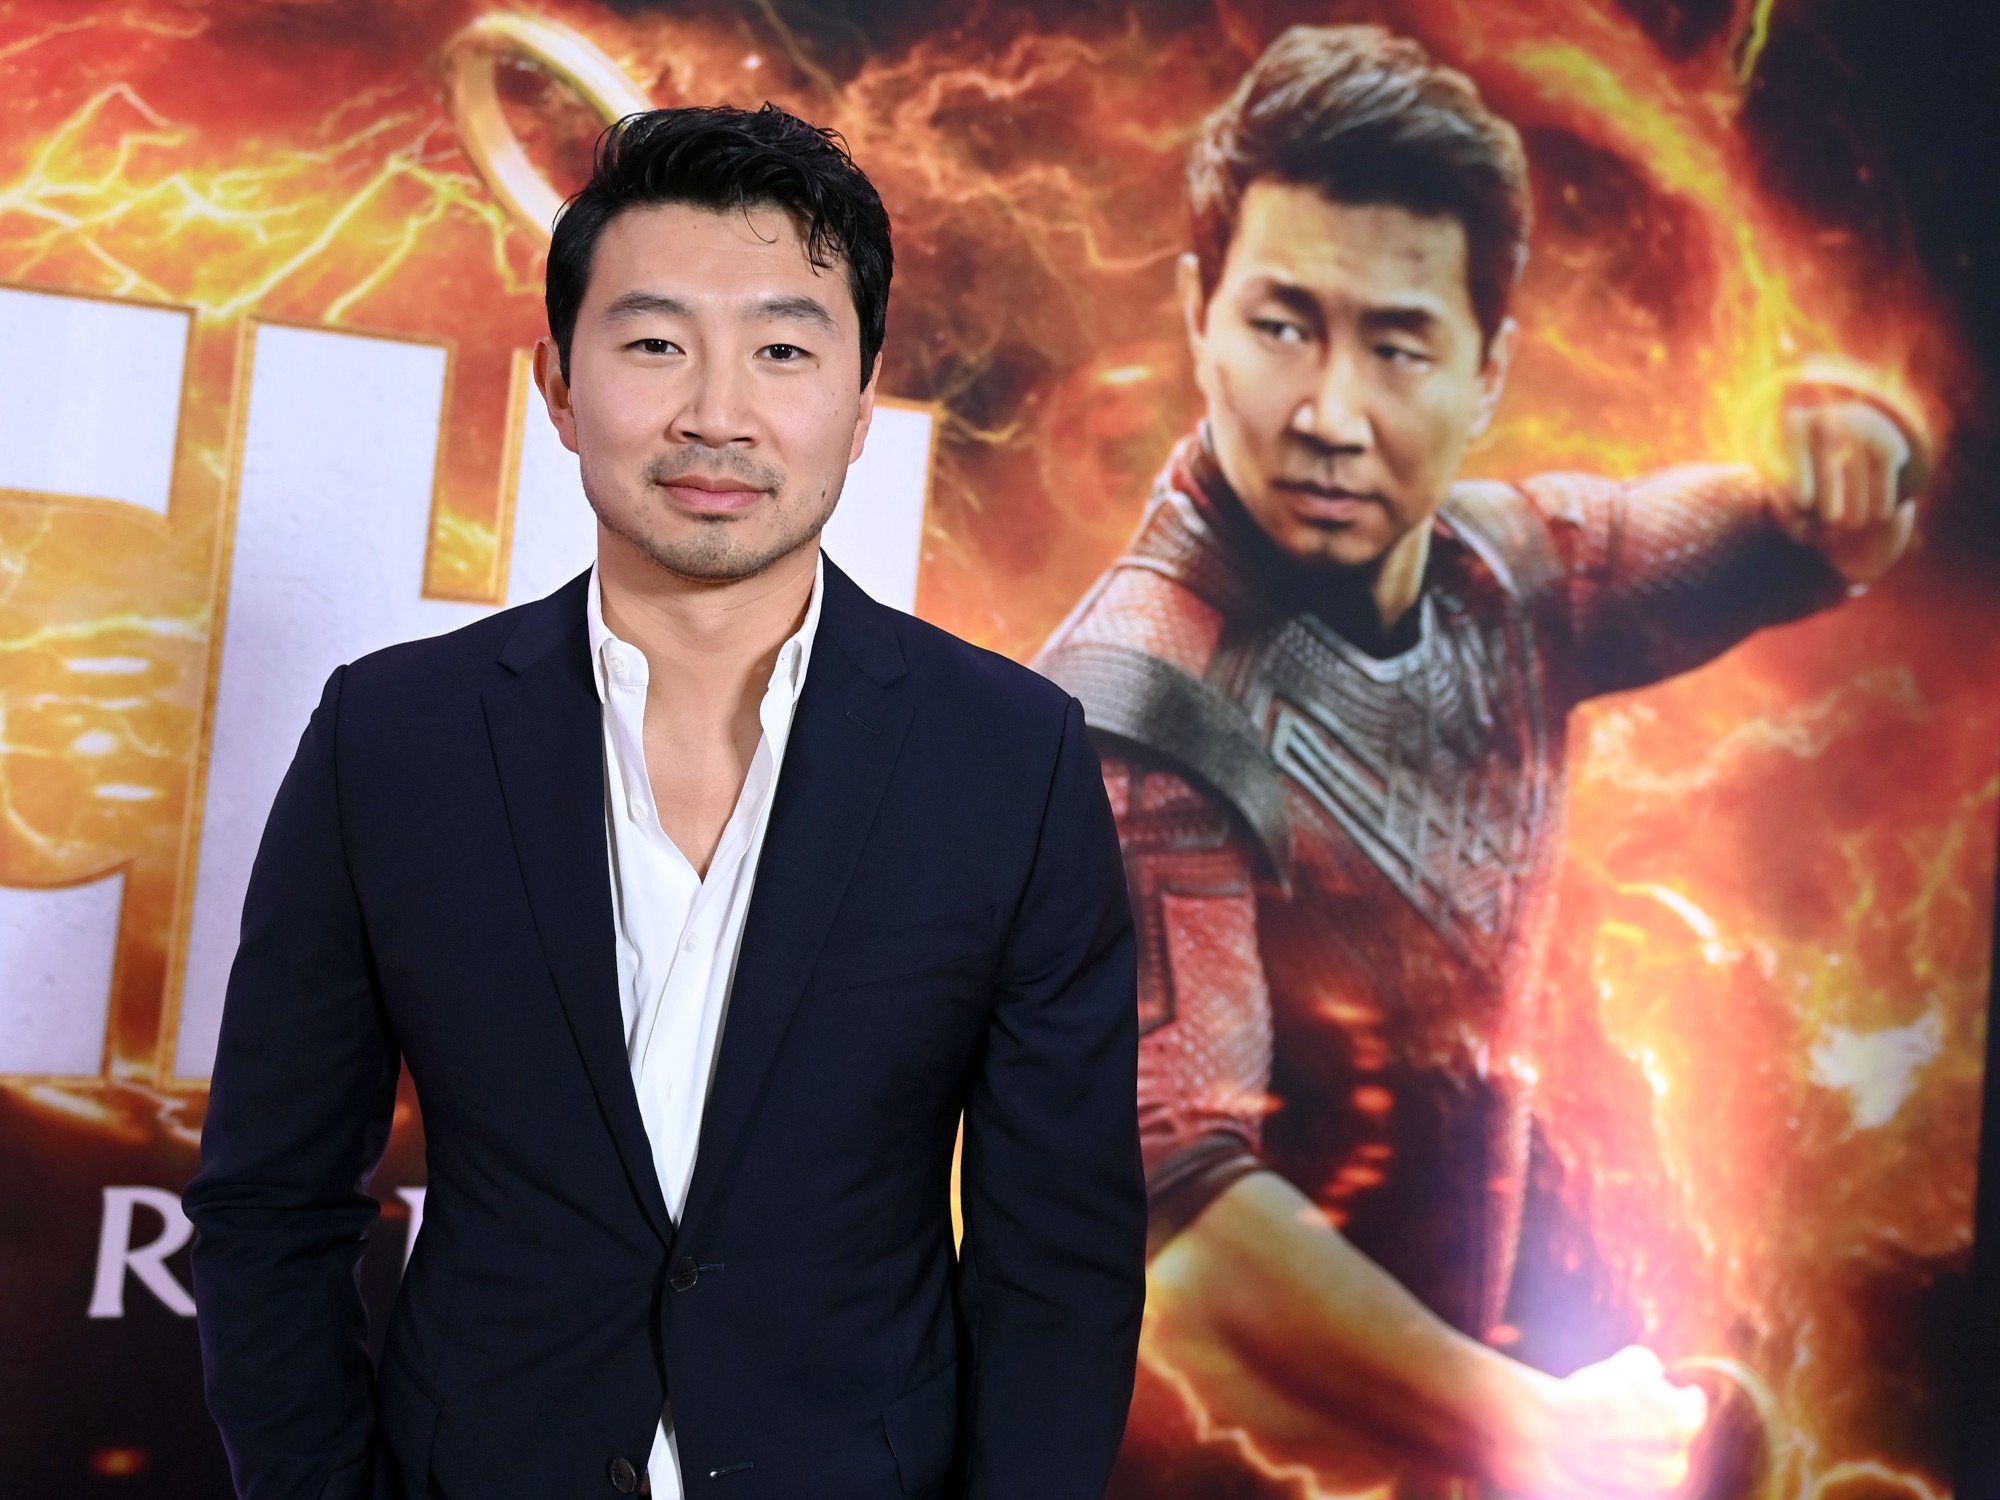 Marvel star Simu Liu at the premiere for 'Shang-Chi and the Legend of the Ten Rings.' He's wearing a white button-up shirt and black jacket. He's staring at the camera and standing in front of an image of his character, Shang-Chi.